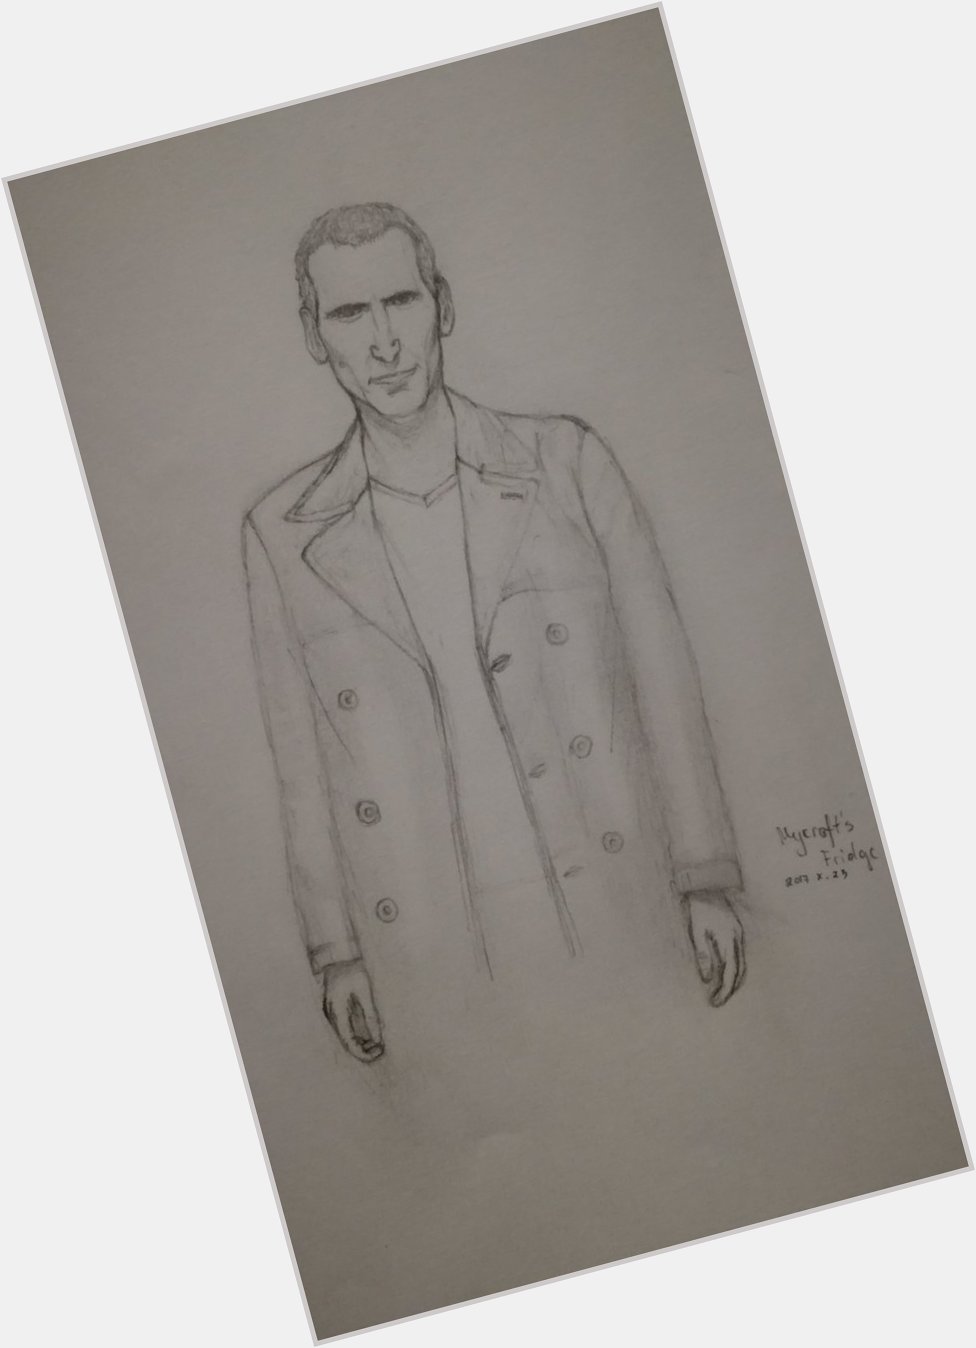 Happy birthday Christopher Eccleston!
We have bday on the same day    